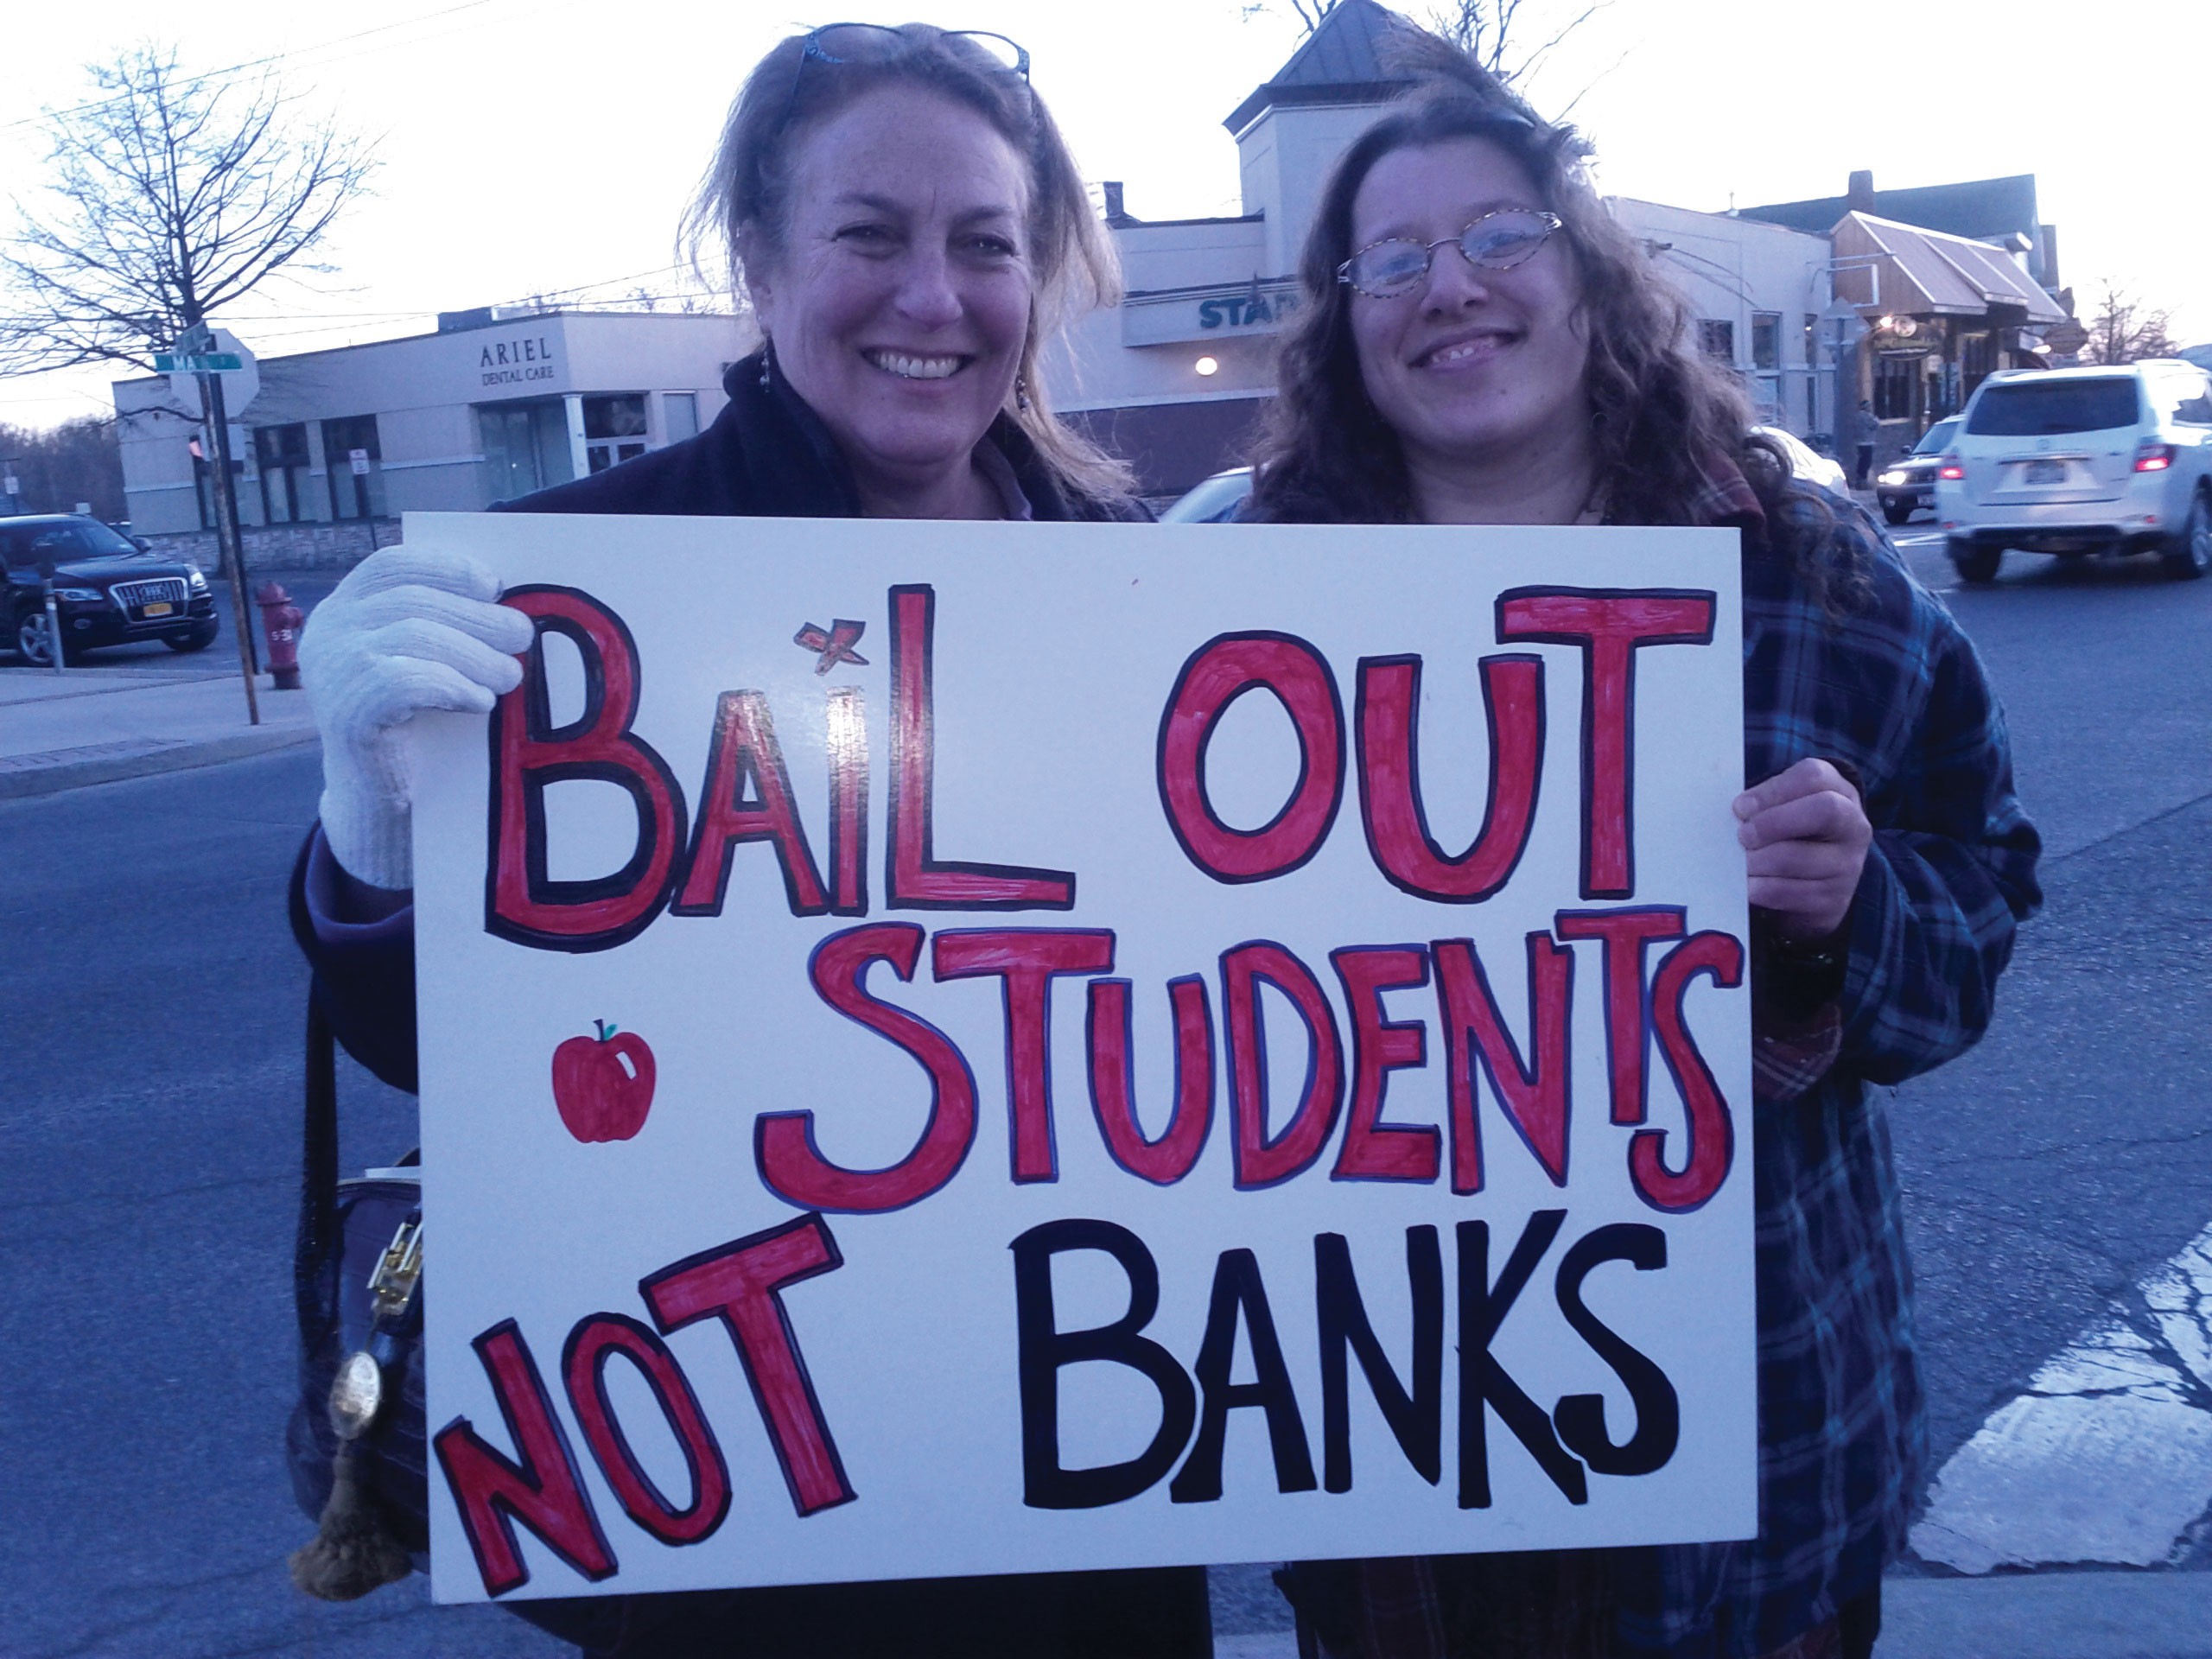 New Paltz Town Supervisor Susan Zimet and Amanda Sissenstein of Occupy New Paltz at the #Occupy Education March and Rally in downtown New Paltz on March 10. Photo: Michelle Ridell.